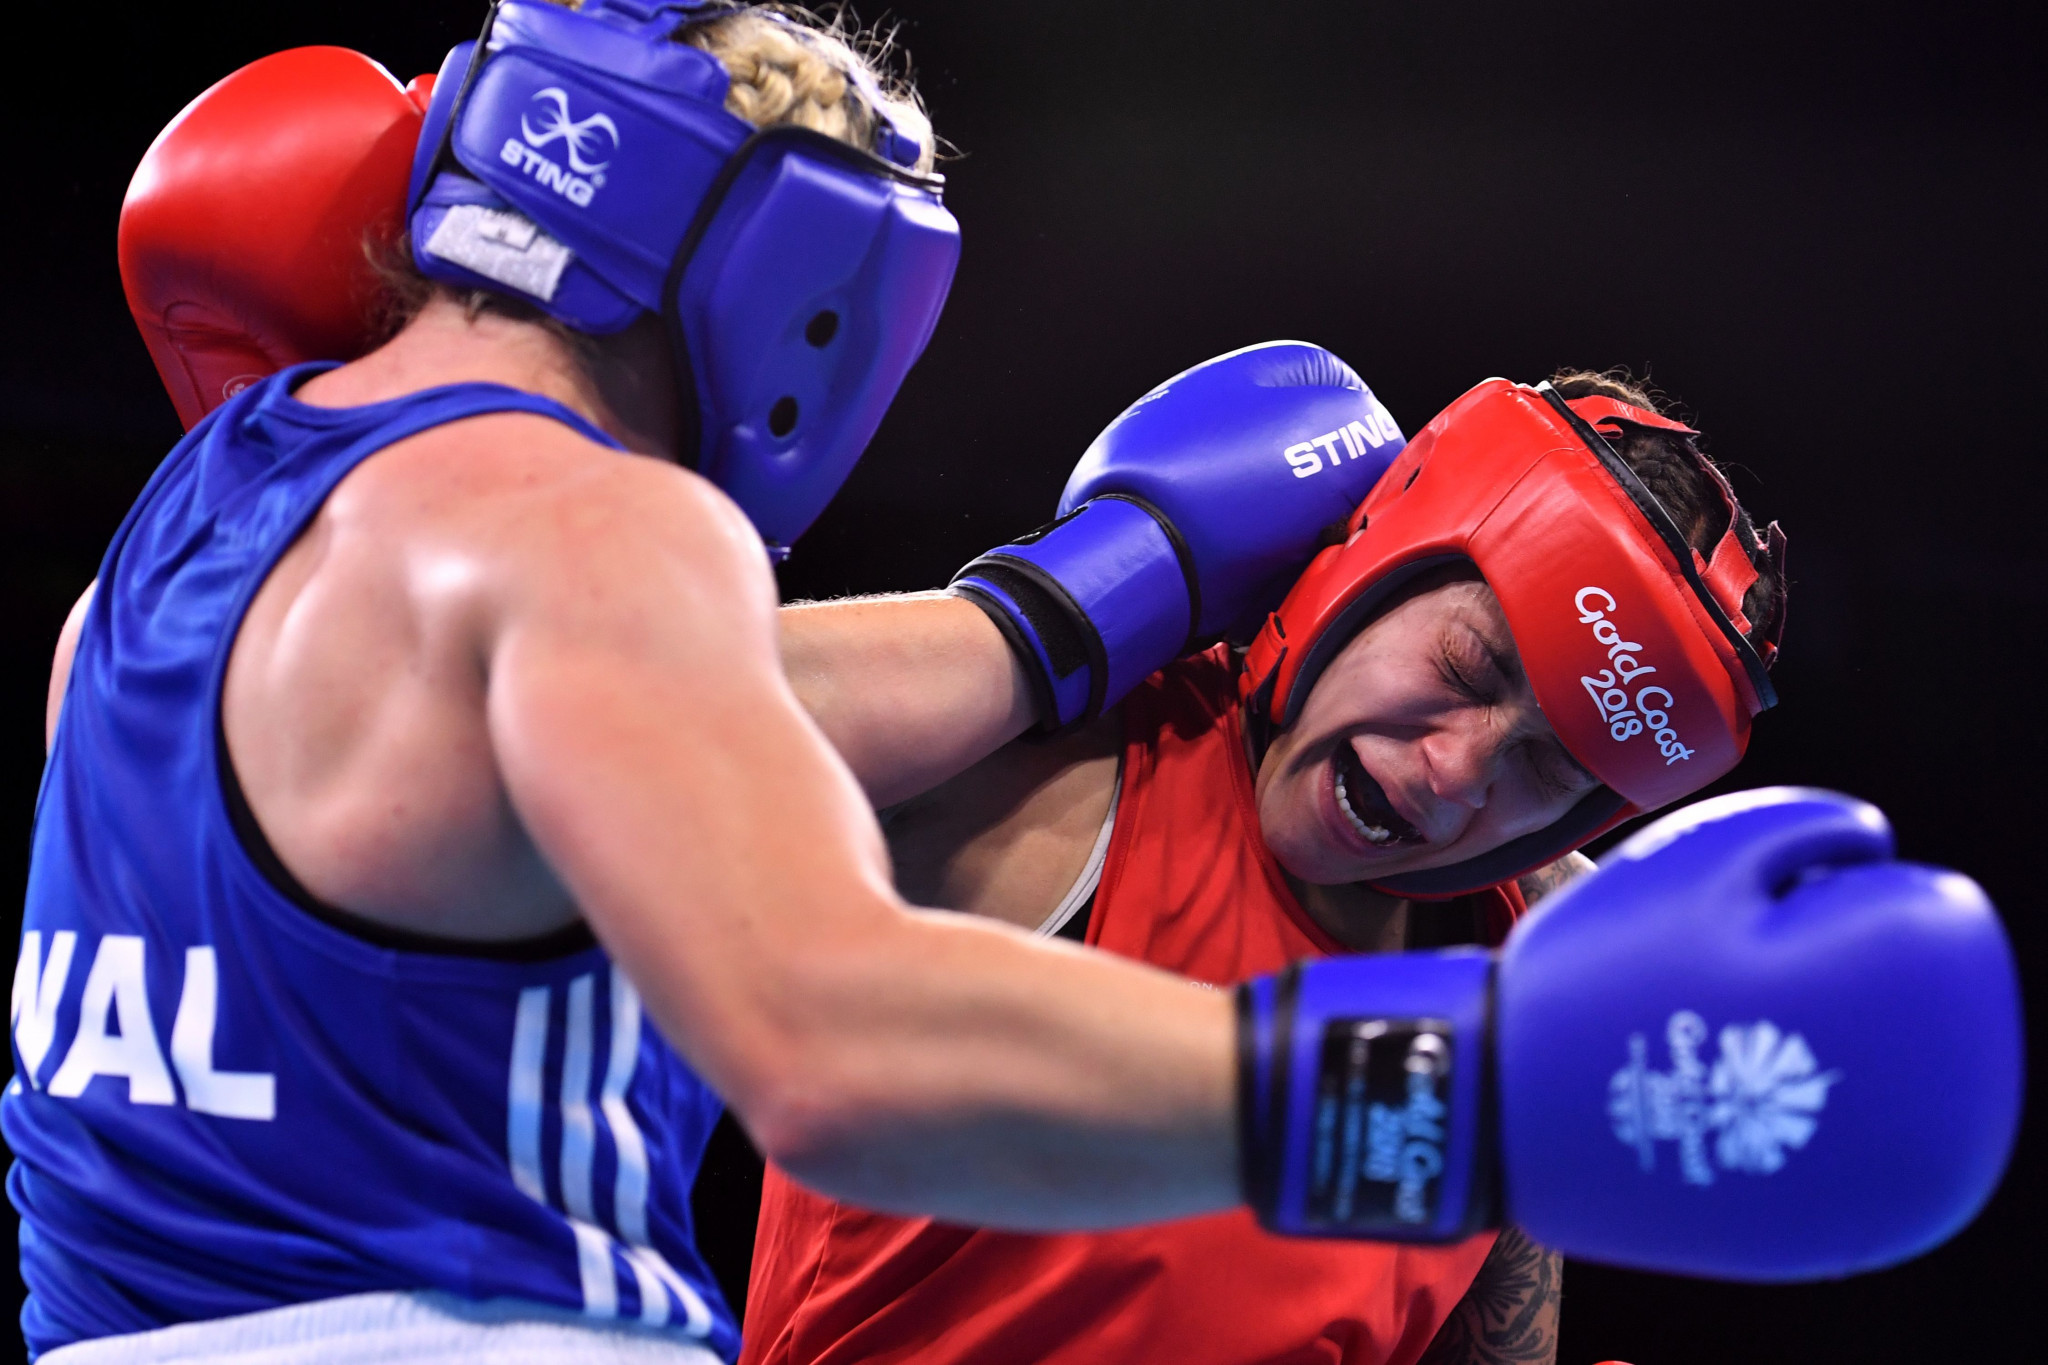 World champion Thibeault leads Canadian boxing team for Birmingham 2022